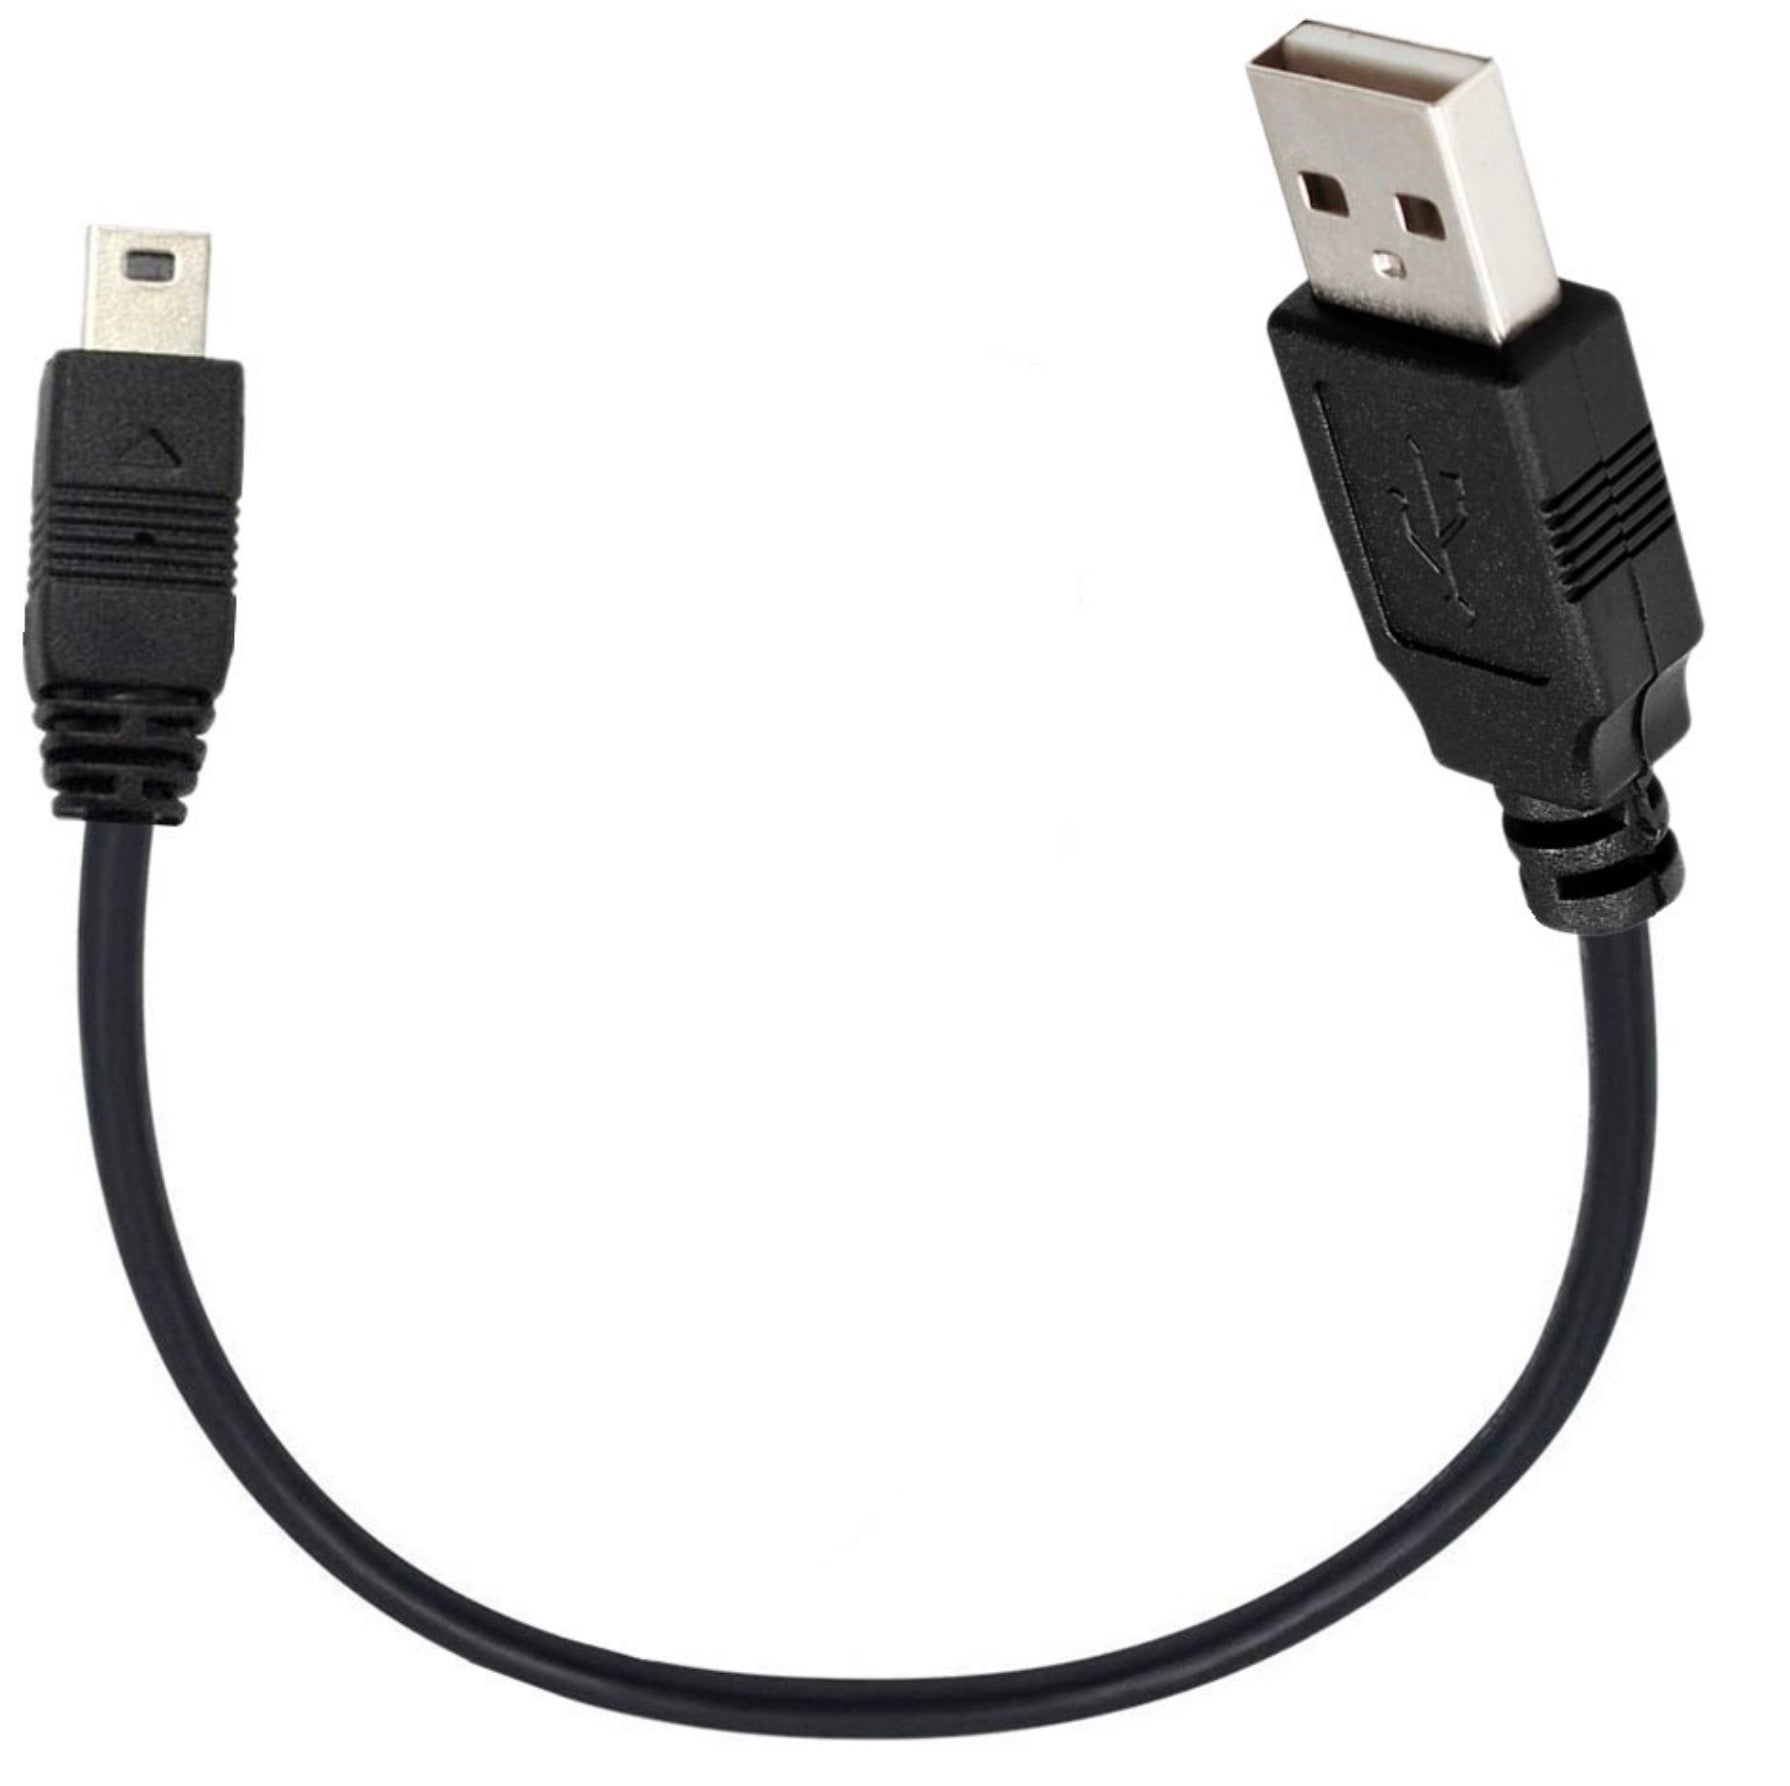 USB 2.0 Type A to Mini B Data Sync & Charging Cable 0.25m